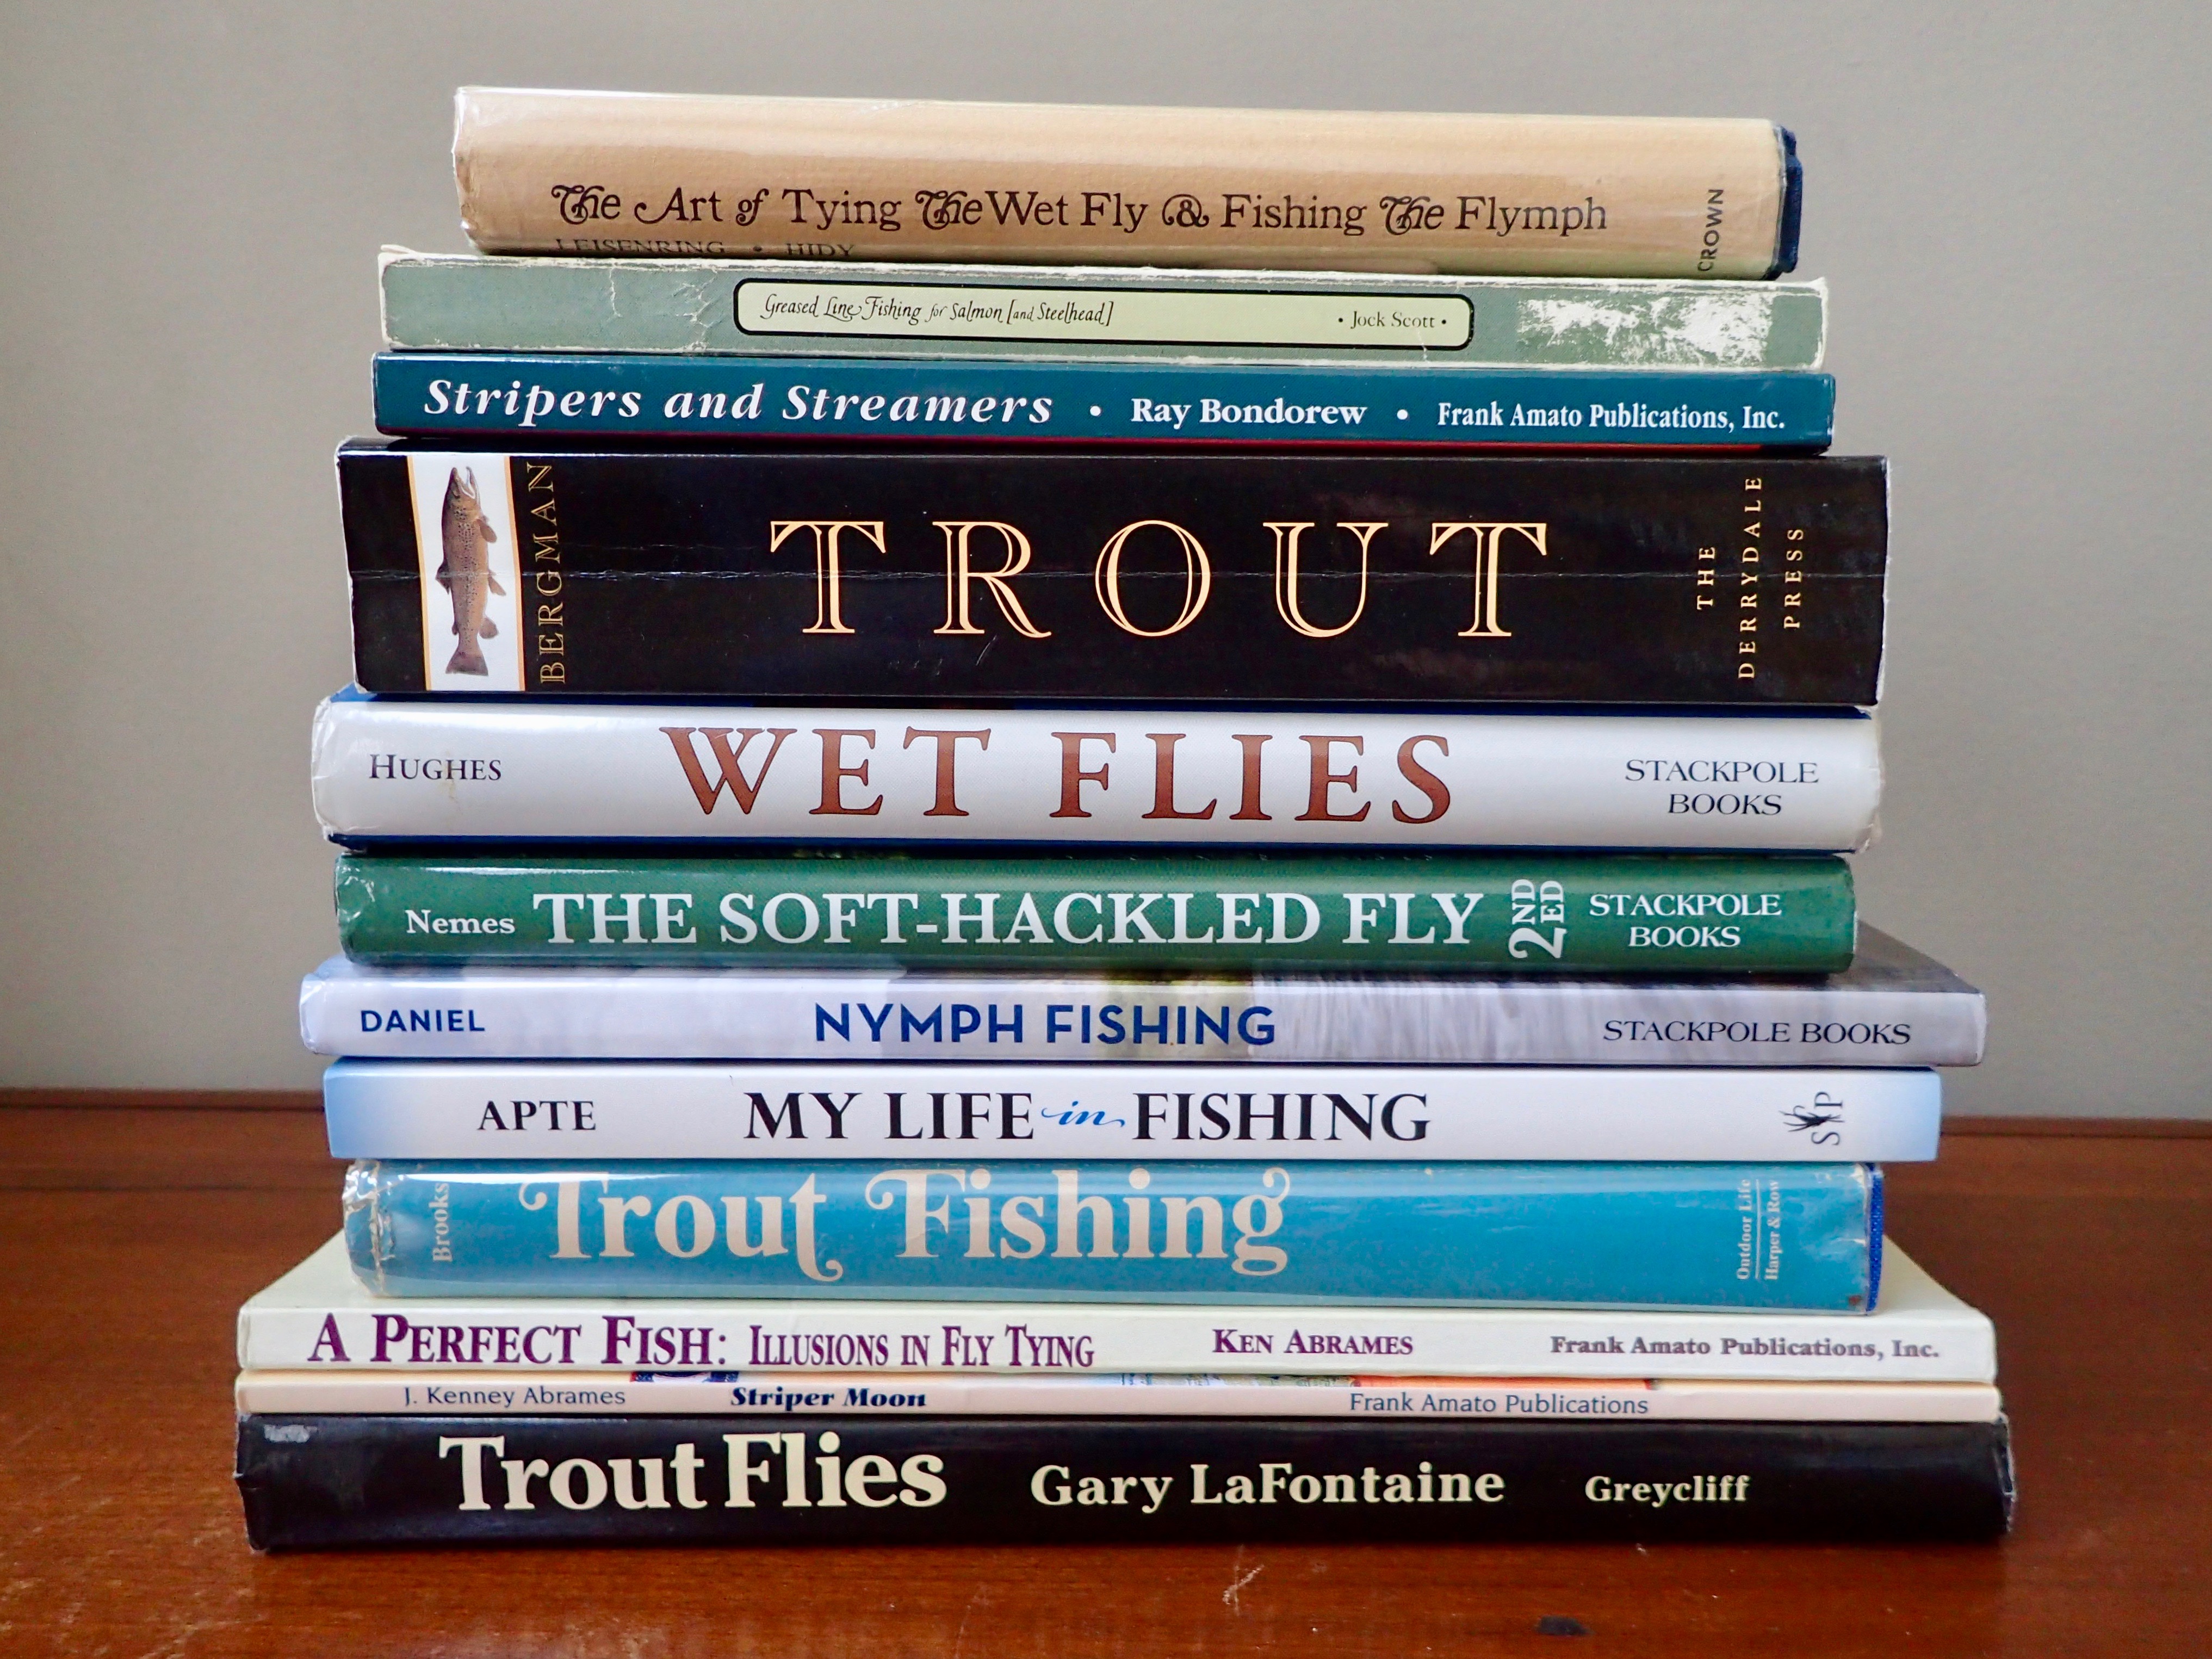 A resource for hard-to-find fly fishing books